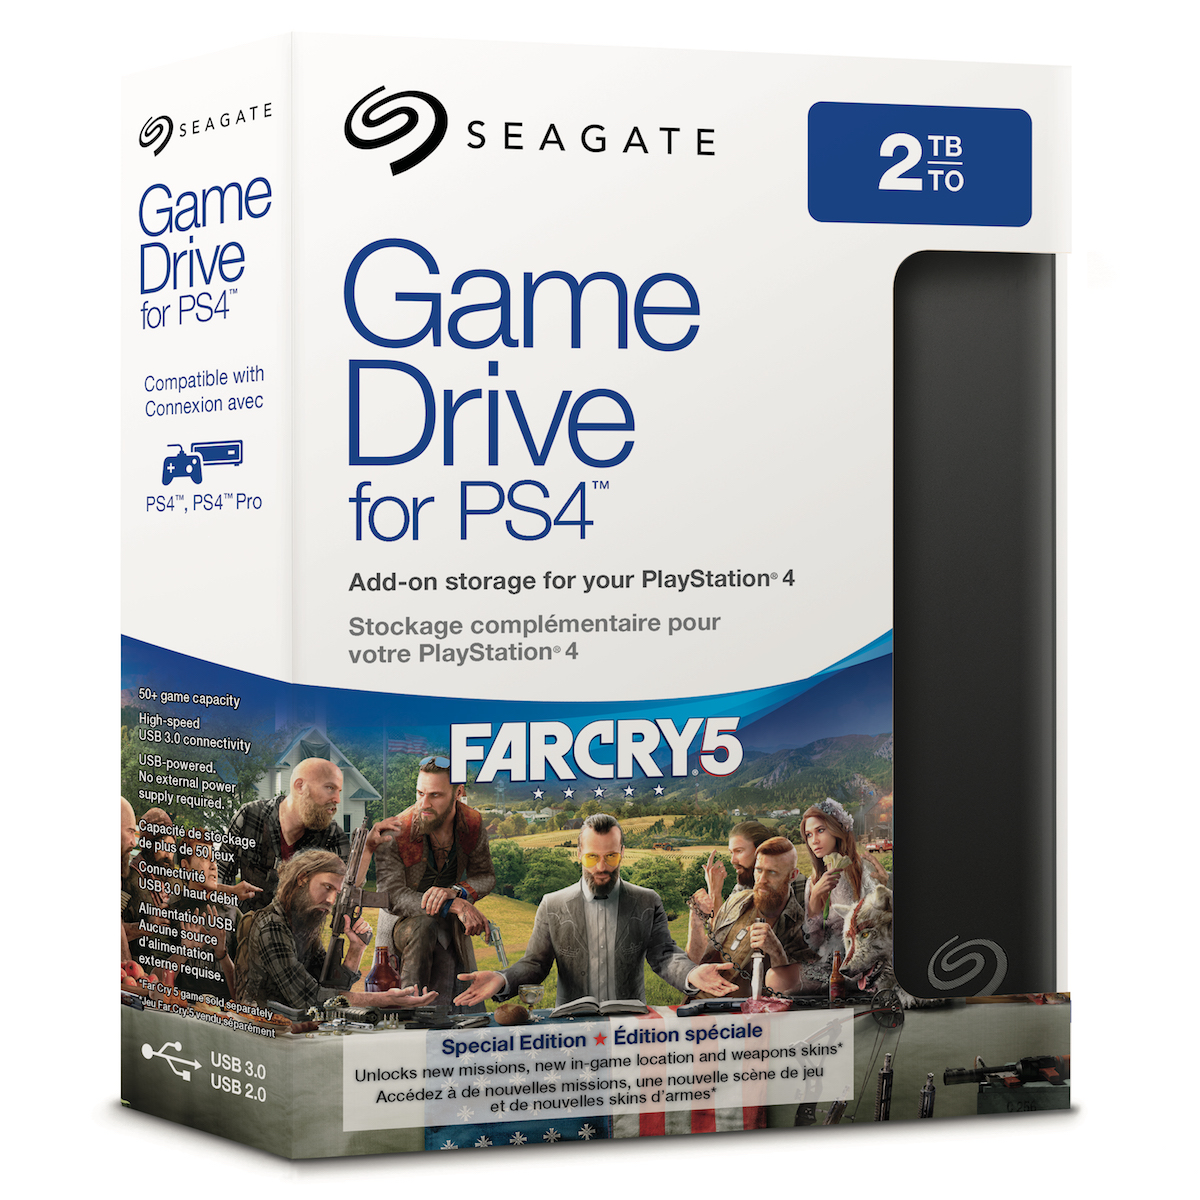 Seagate Game Drive for PS4 Far Cry 5 Special Edition